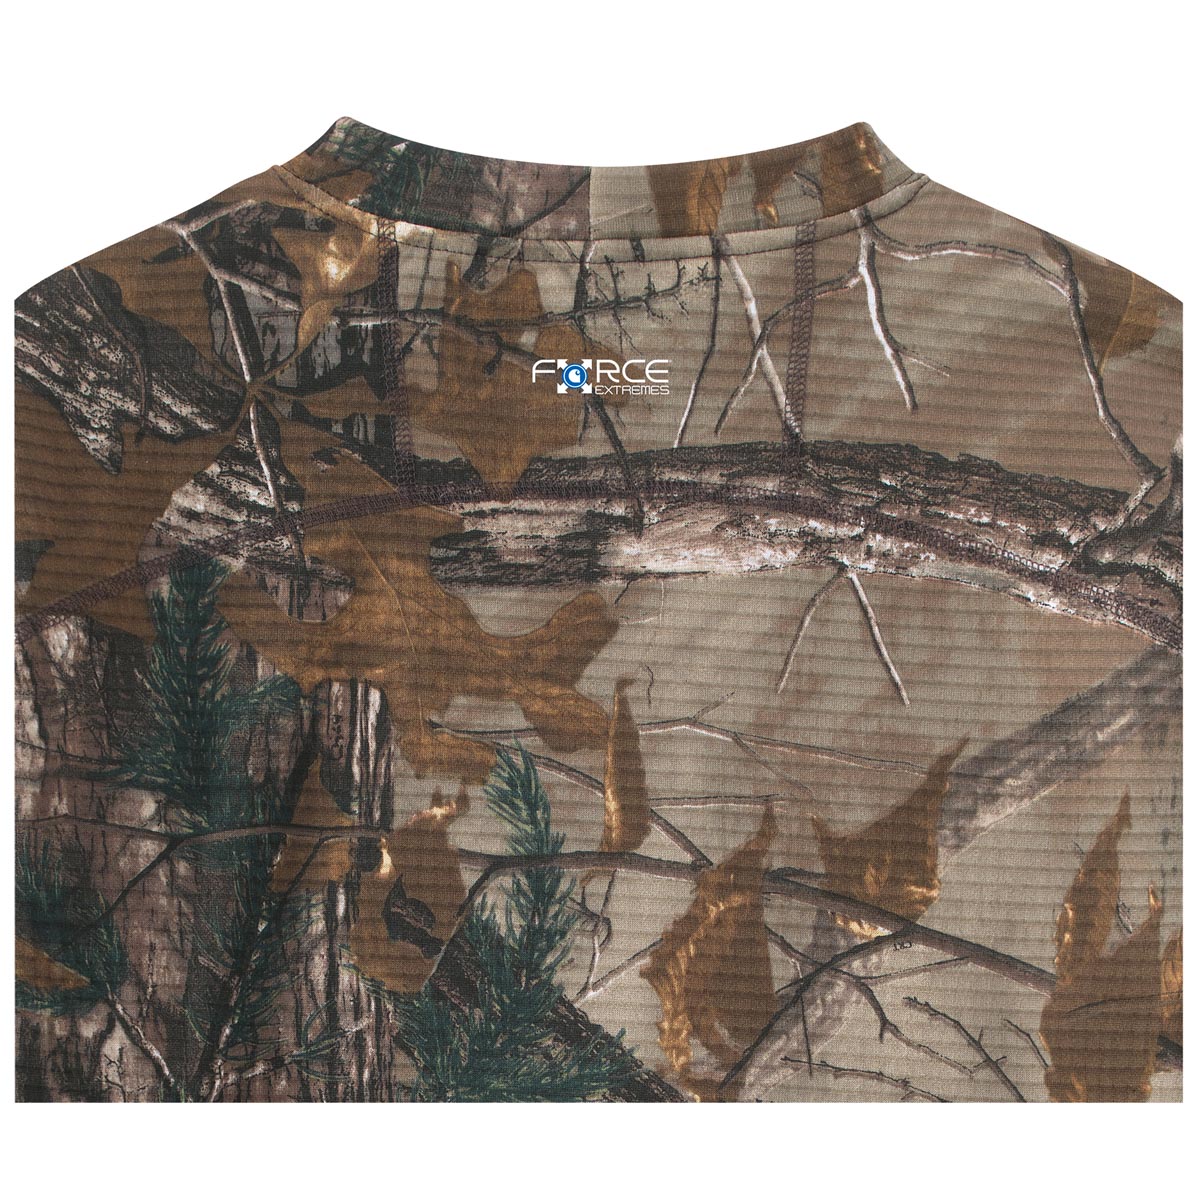 Carhartt Men's Base Force Extremes Cold Weather Camo Crewneck